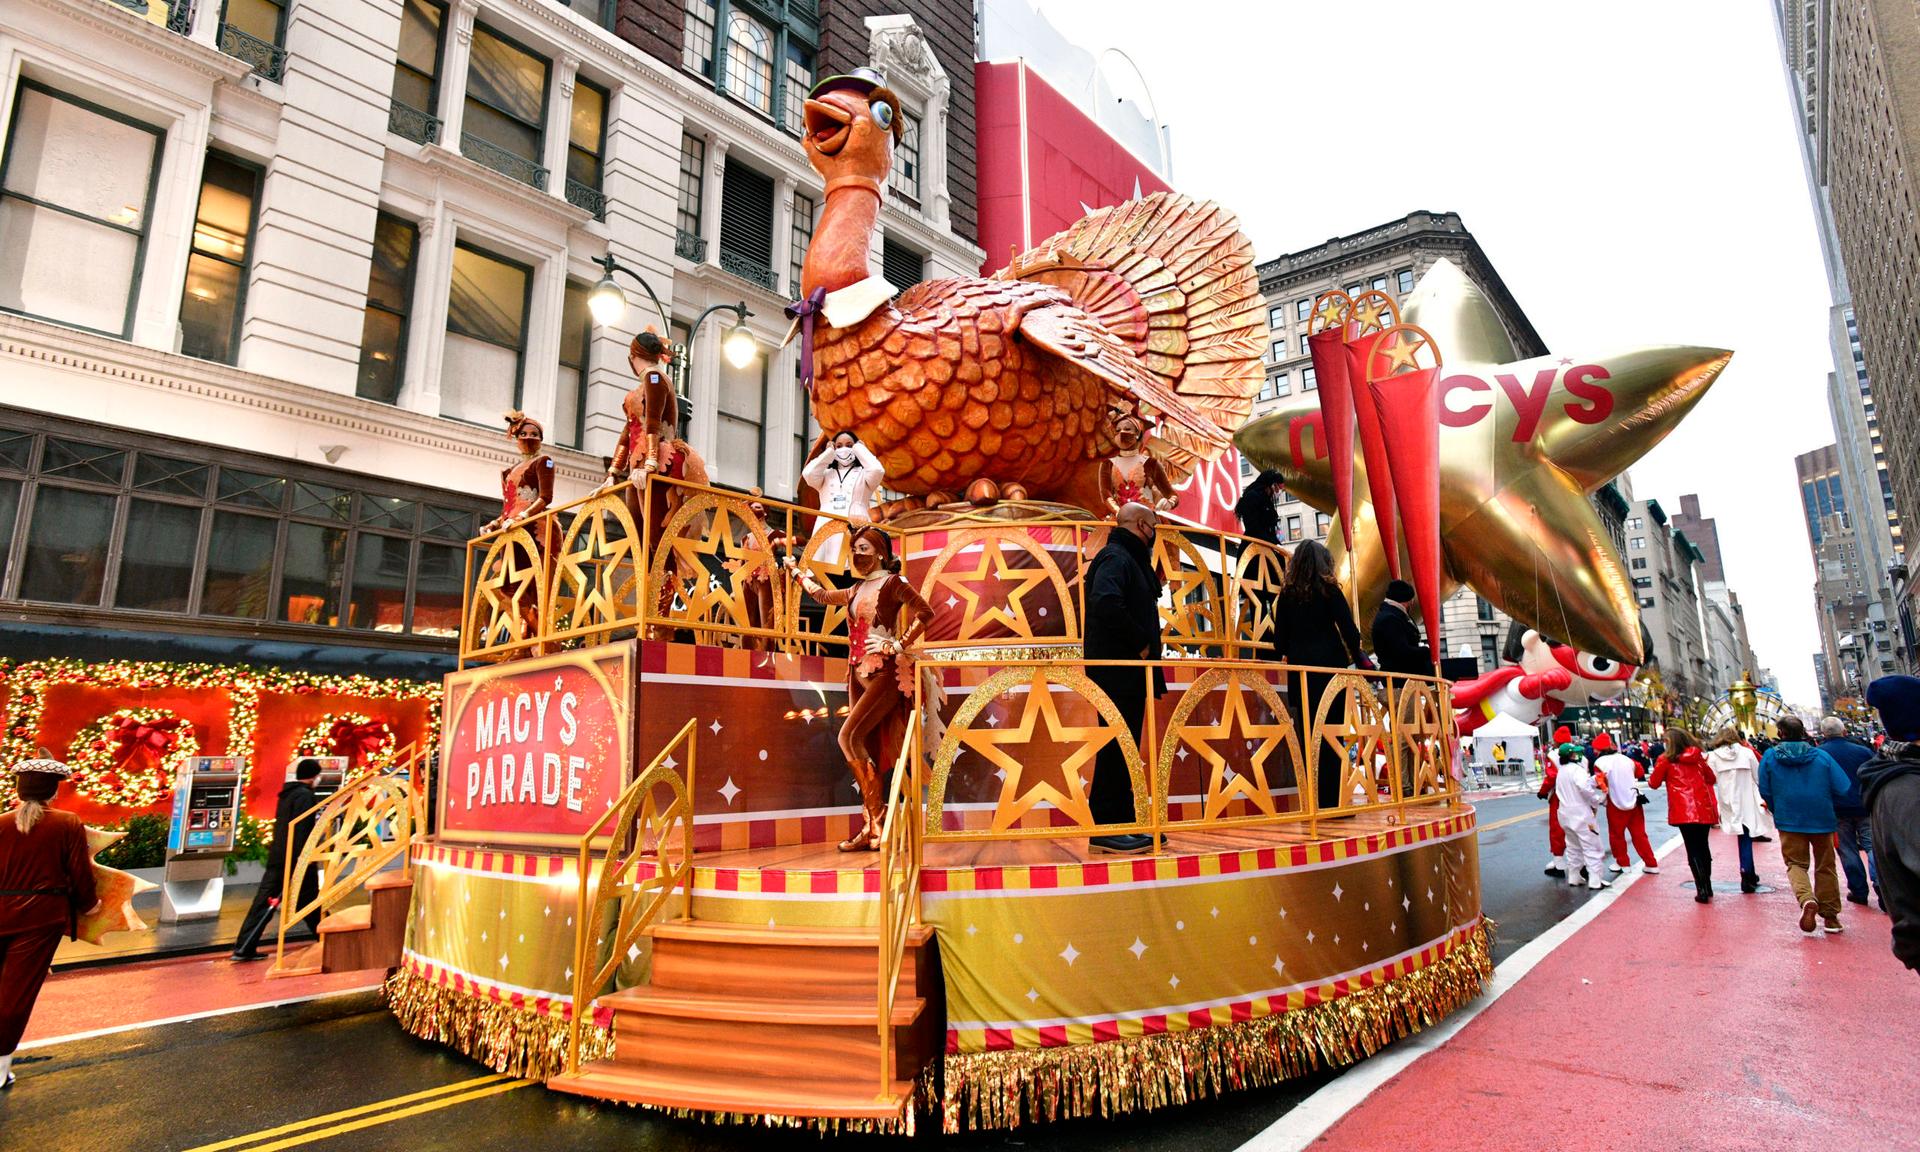 NEW YORK, NEW YORK &#8211; NOVEMBER 26: A view of the Tom the Turkey float at the 94th Annual Macy&#8217;s Thanksgiving Day Parade® on November 26, 2020 in New York City. The World-Famous Macy&#8217;s Thanksgiving Day Parade® kicks off the holiday season for millions of television viewers watching safely at home. (Photo by Eugene Gologursky/Getty I...